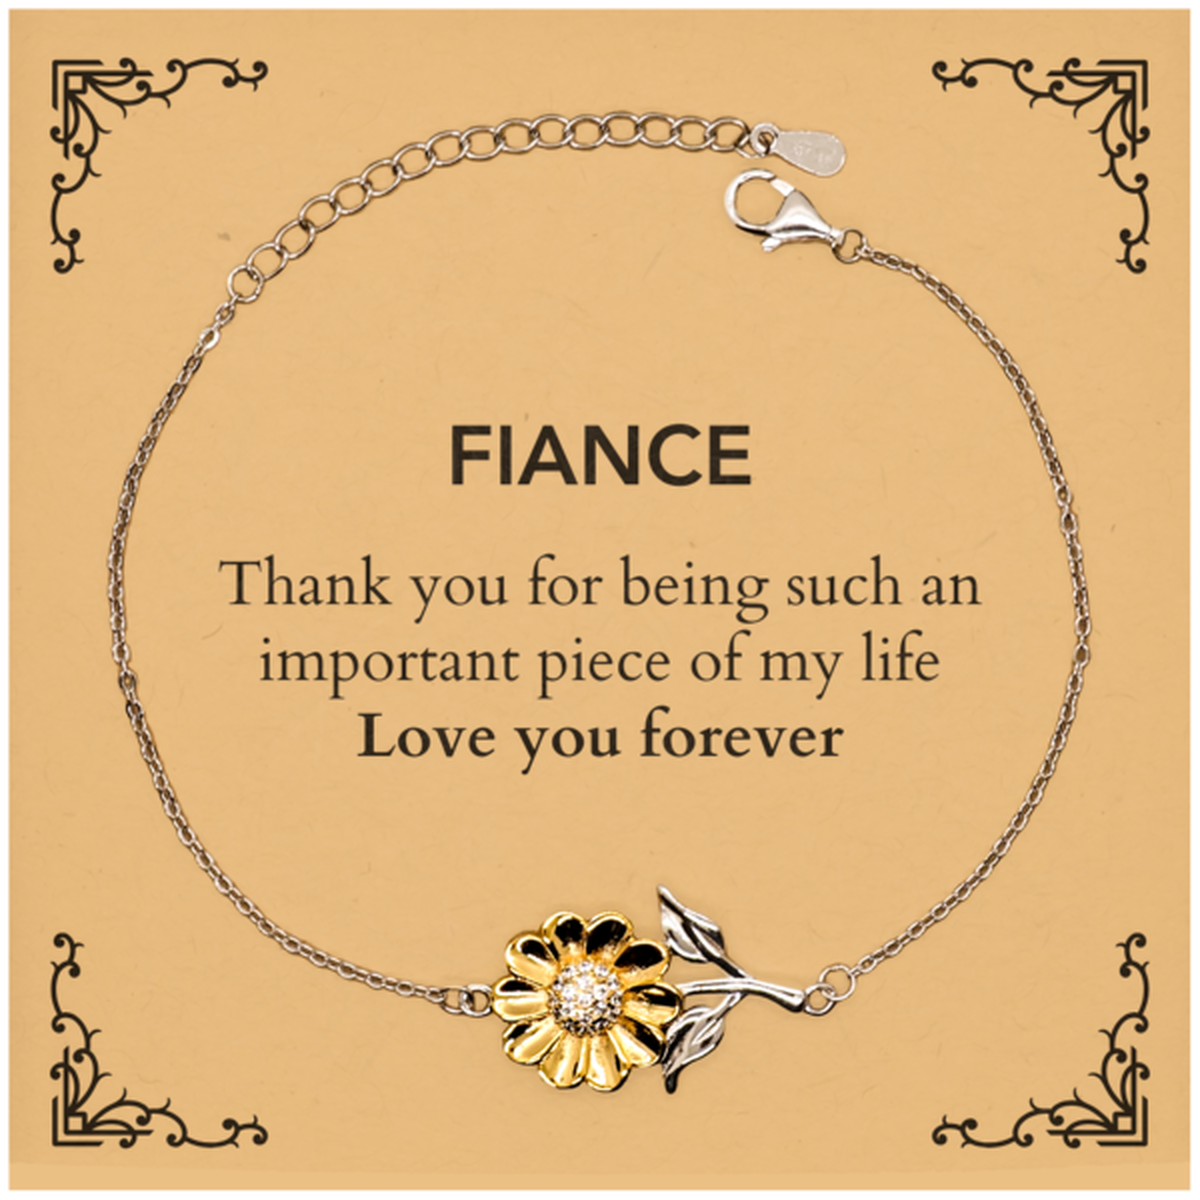 Appropriate Fiance Sunflower Bracelet Epic Birthday Gifts for Fiance Thank you for being such an important piece of my life Fiance Christmas Mothers Fathers Day